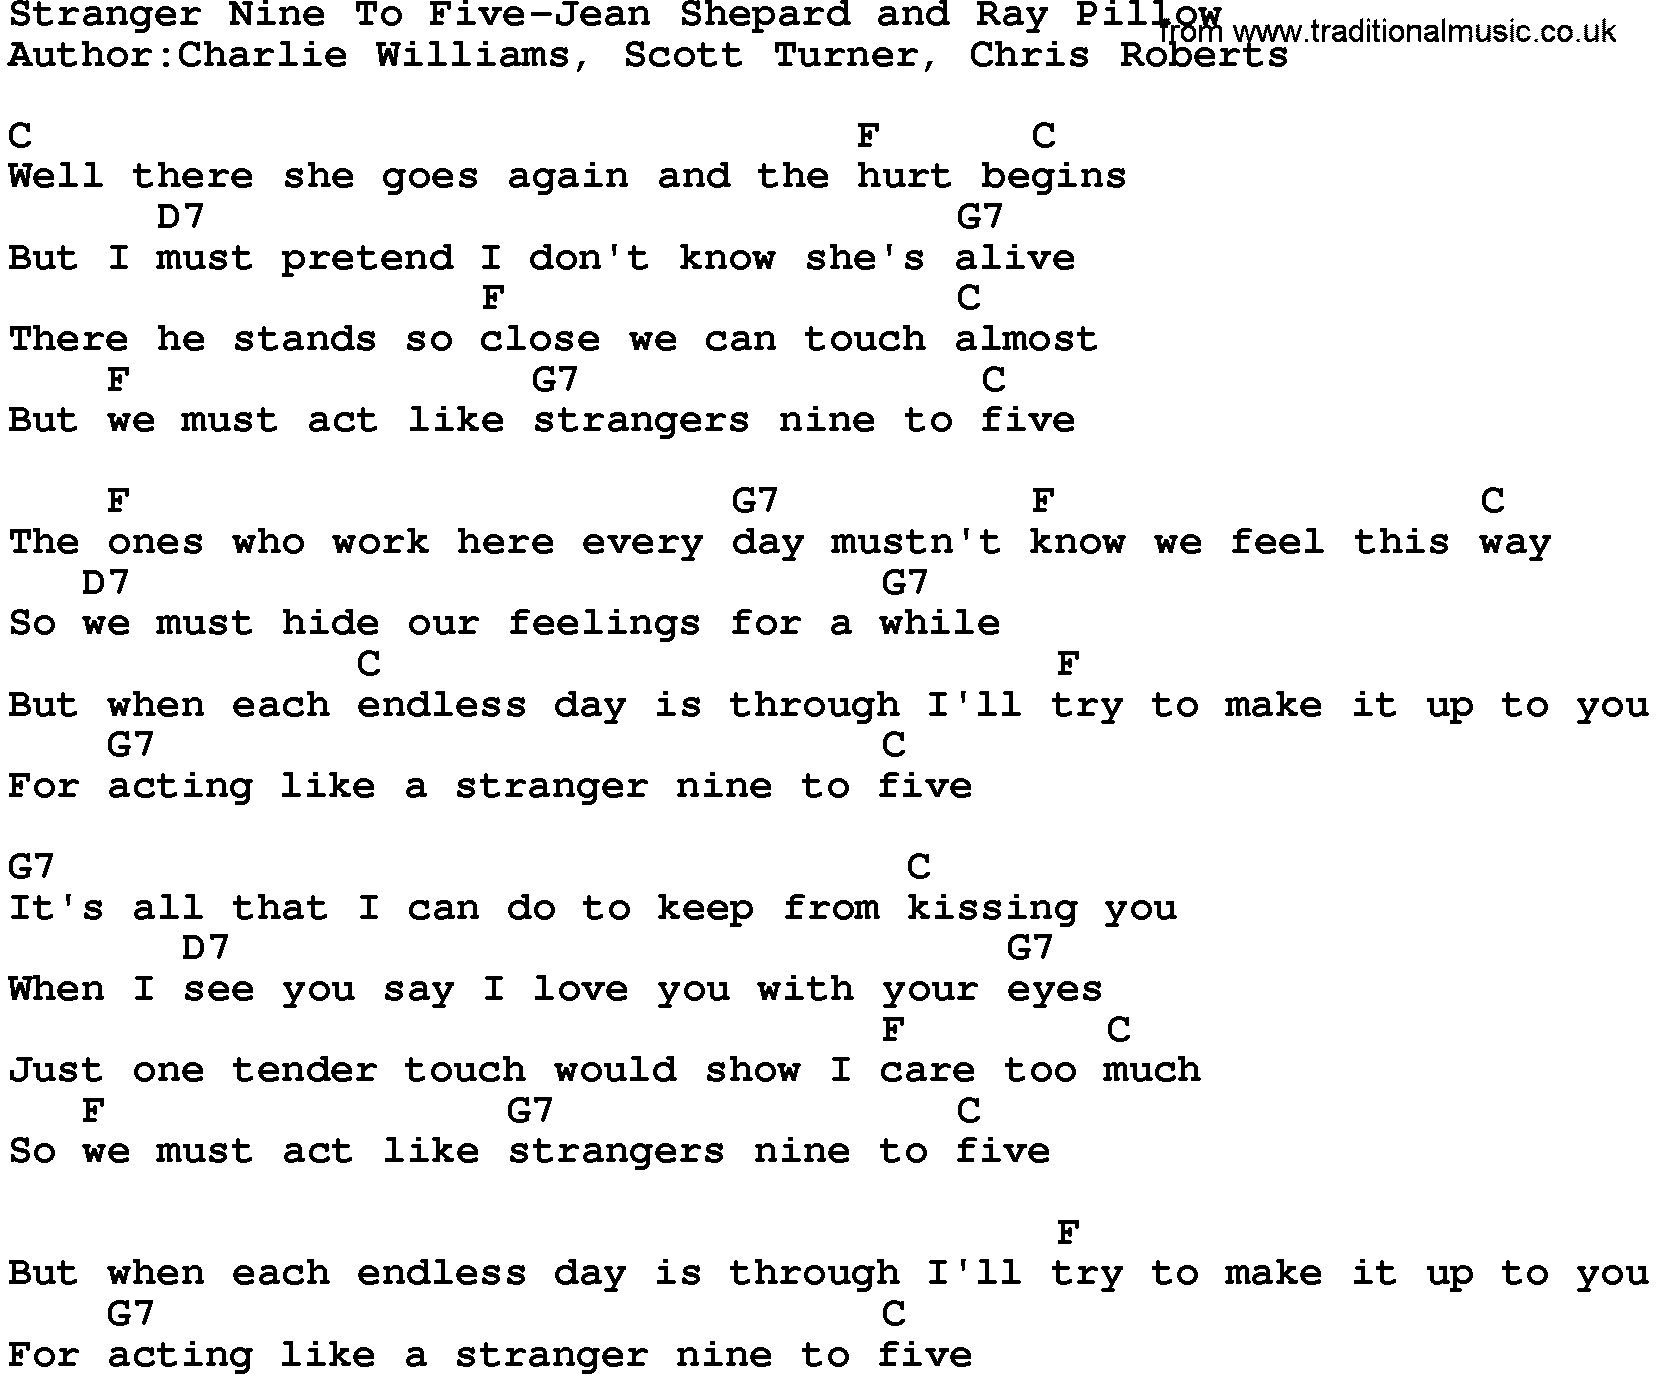 Country music song: Stranger Nine To Five-Jean Shepard And Ray Pillow lyrics and chords